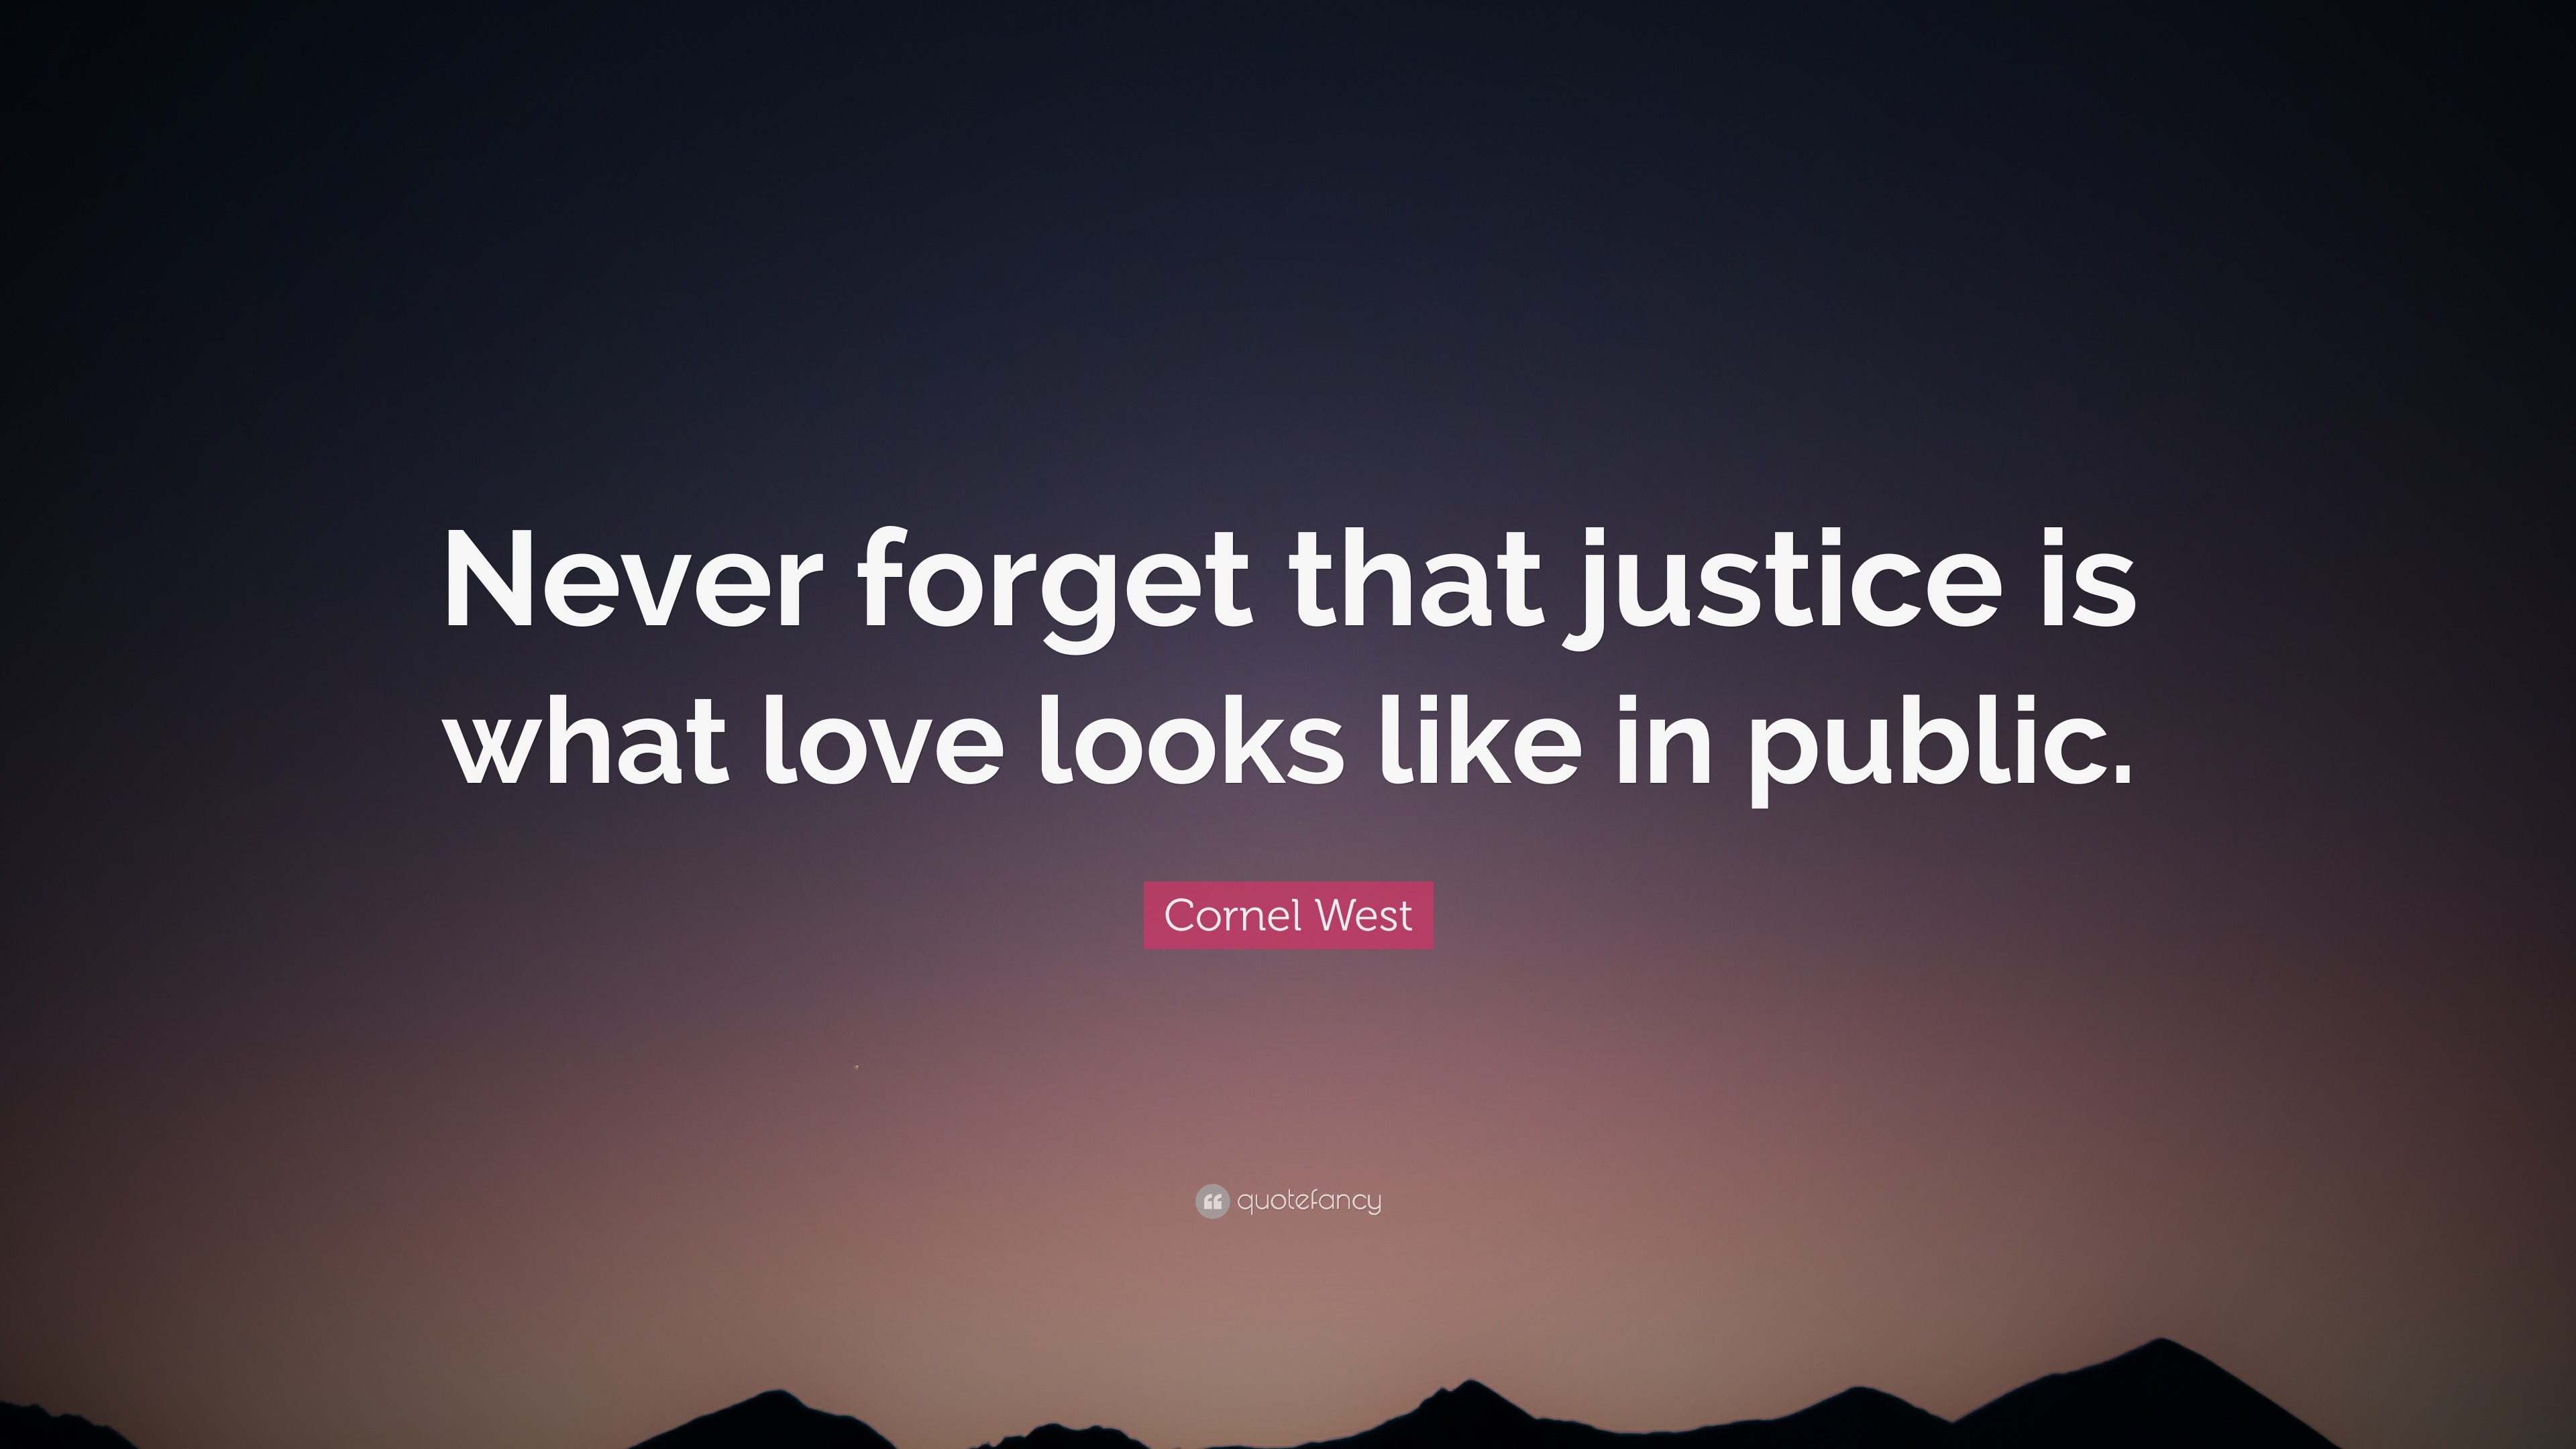 Cornel West Quote: “Never forget that justice is what love looks like